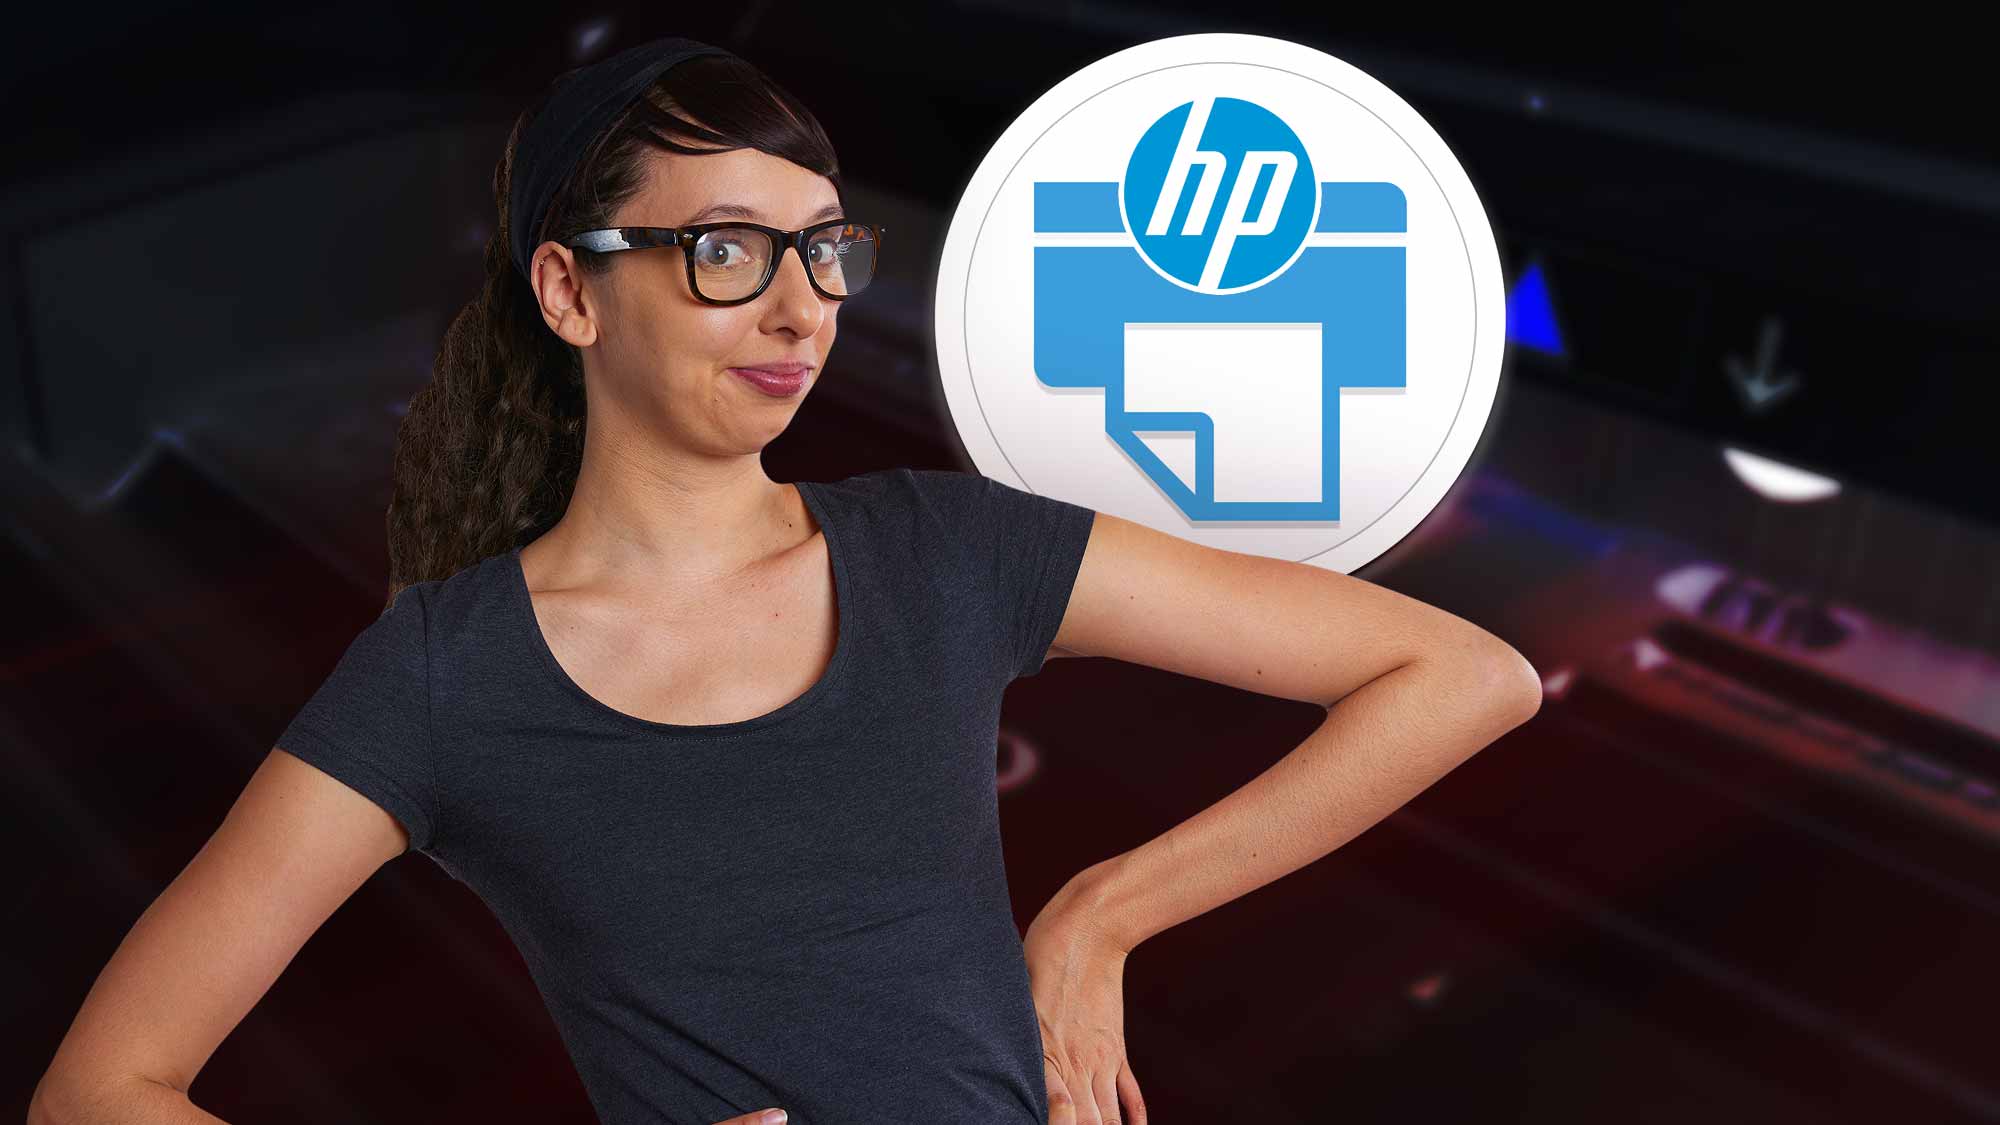 How To Download And Install The HP Utility Mac Application - Easy Tutorial